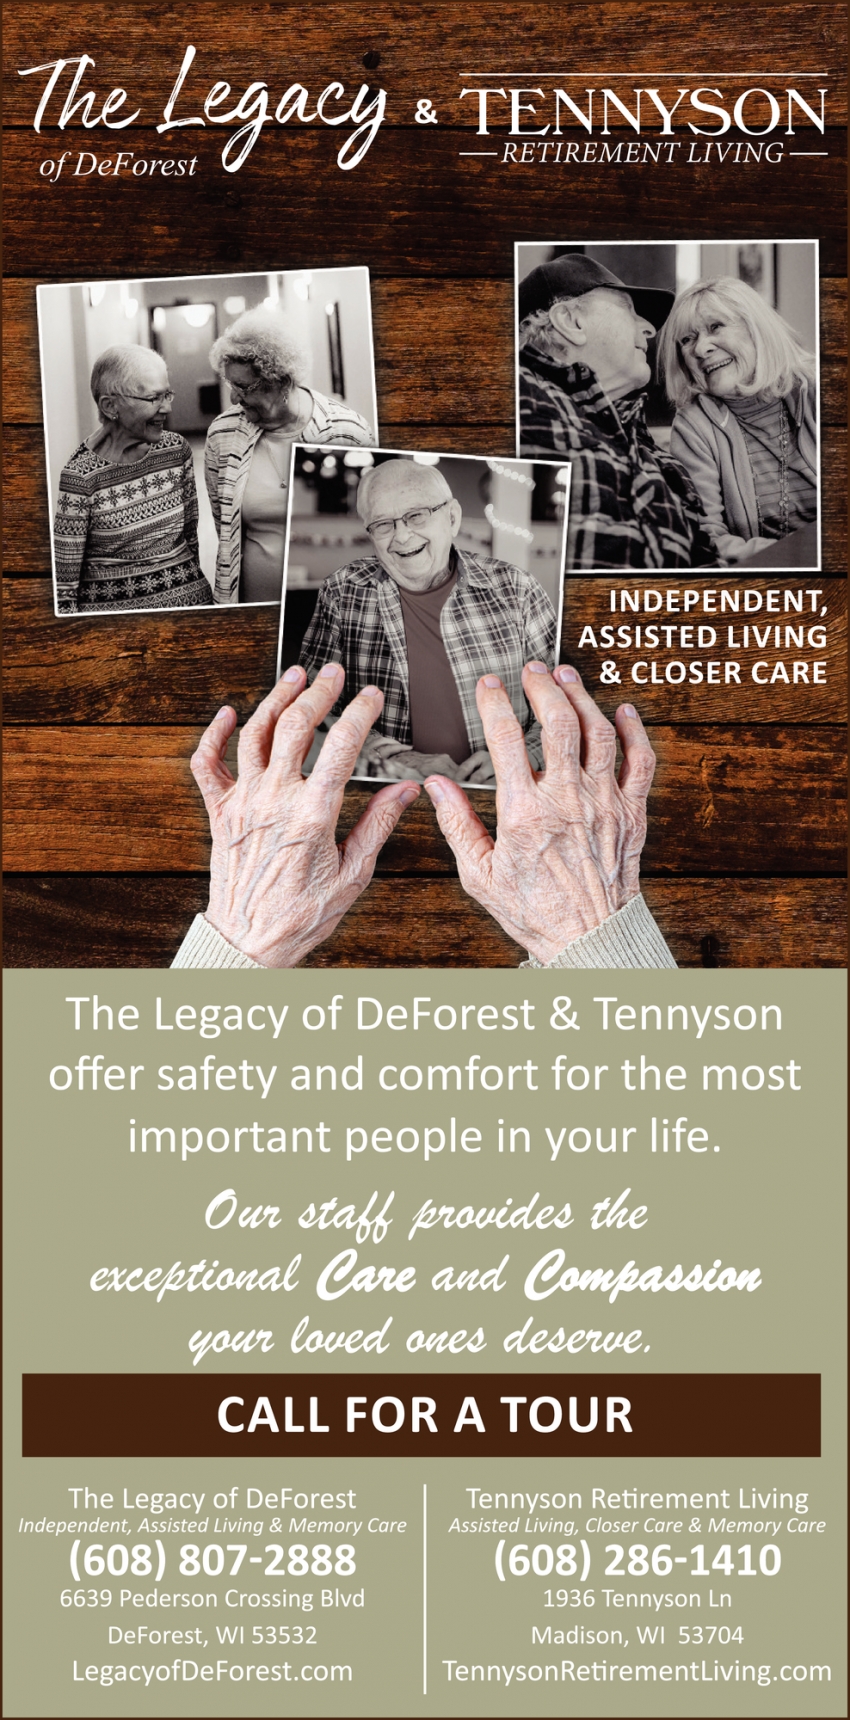 Independent, Assisted Living & Closer Care